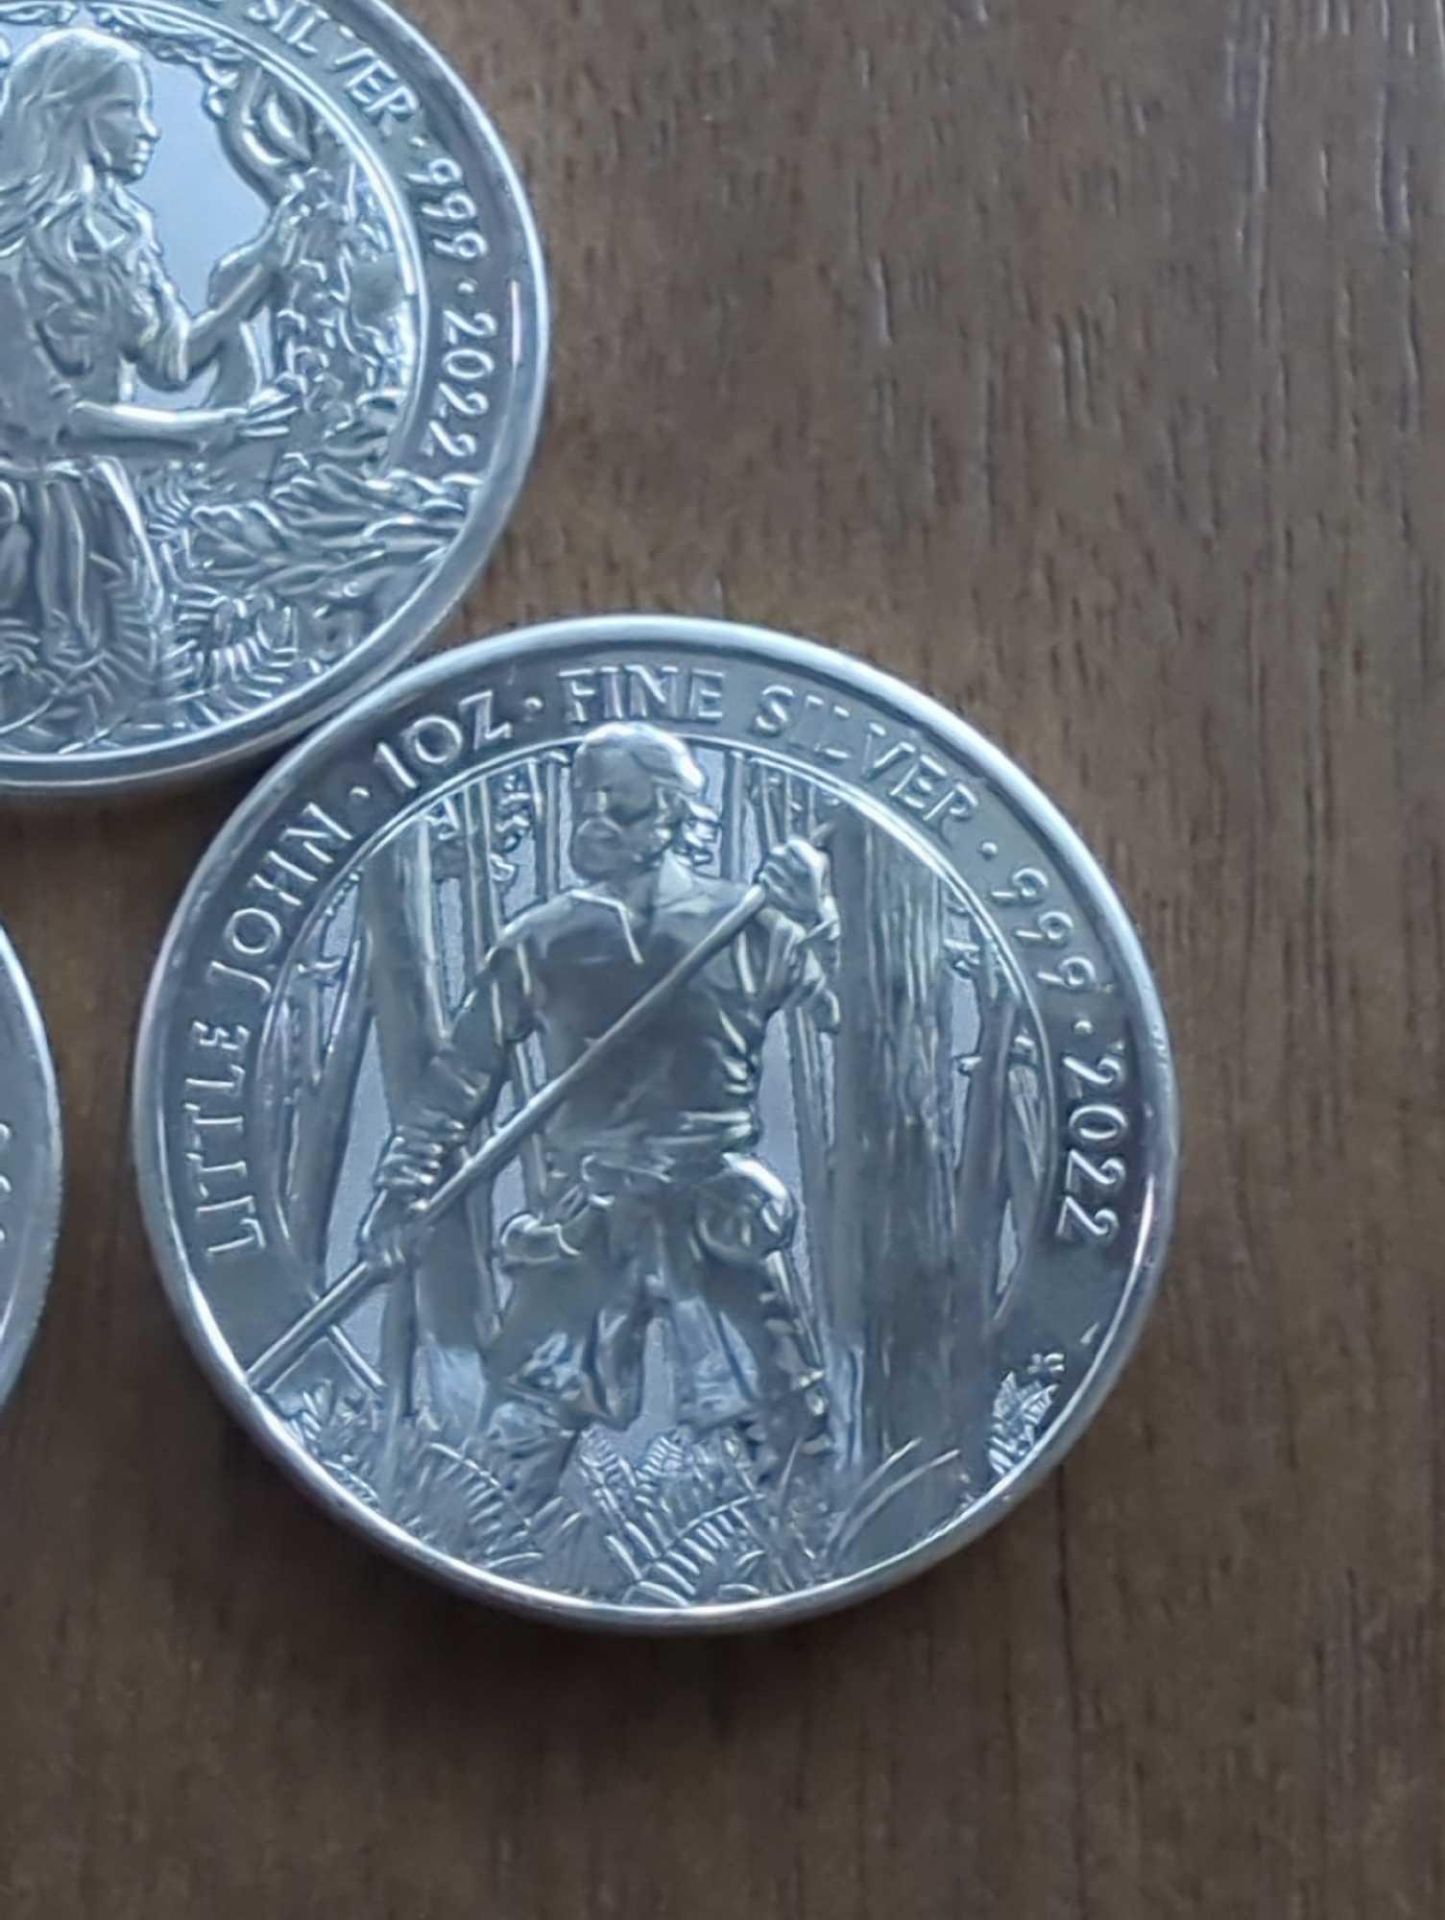 3 coin robinhood, little john, and maid marian silver set - Image 4 of 5